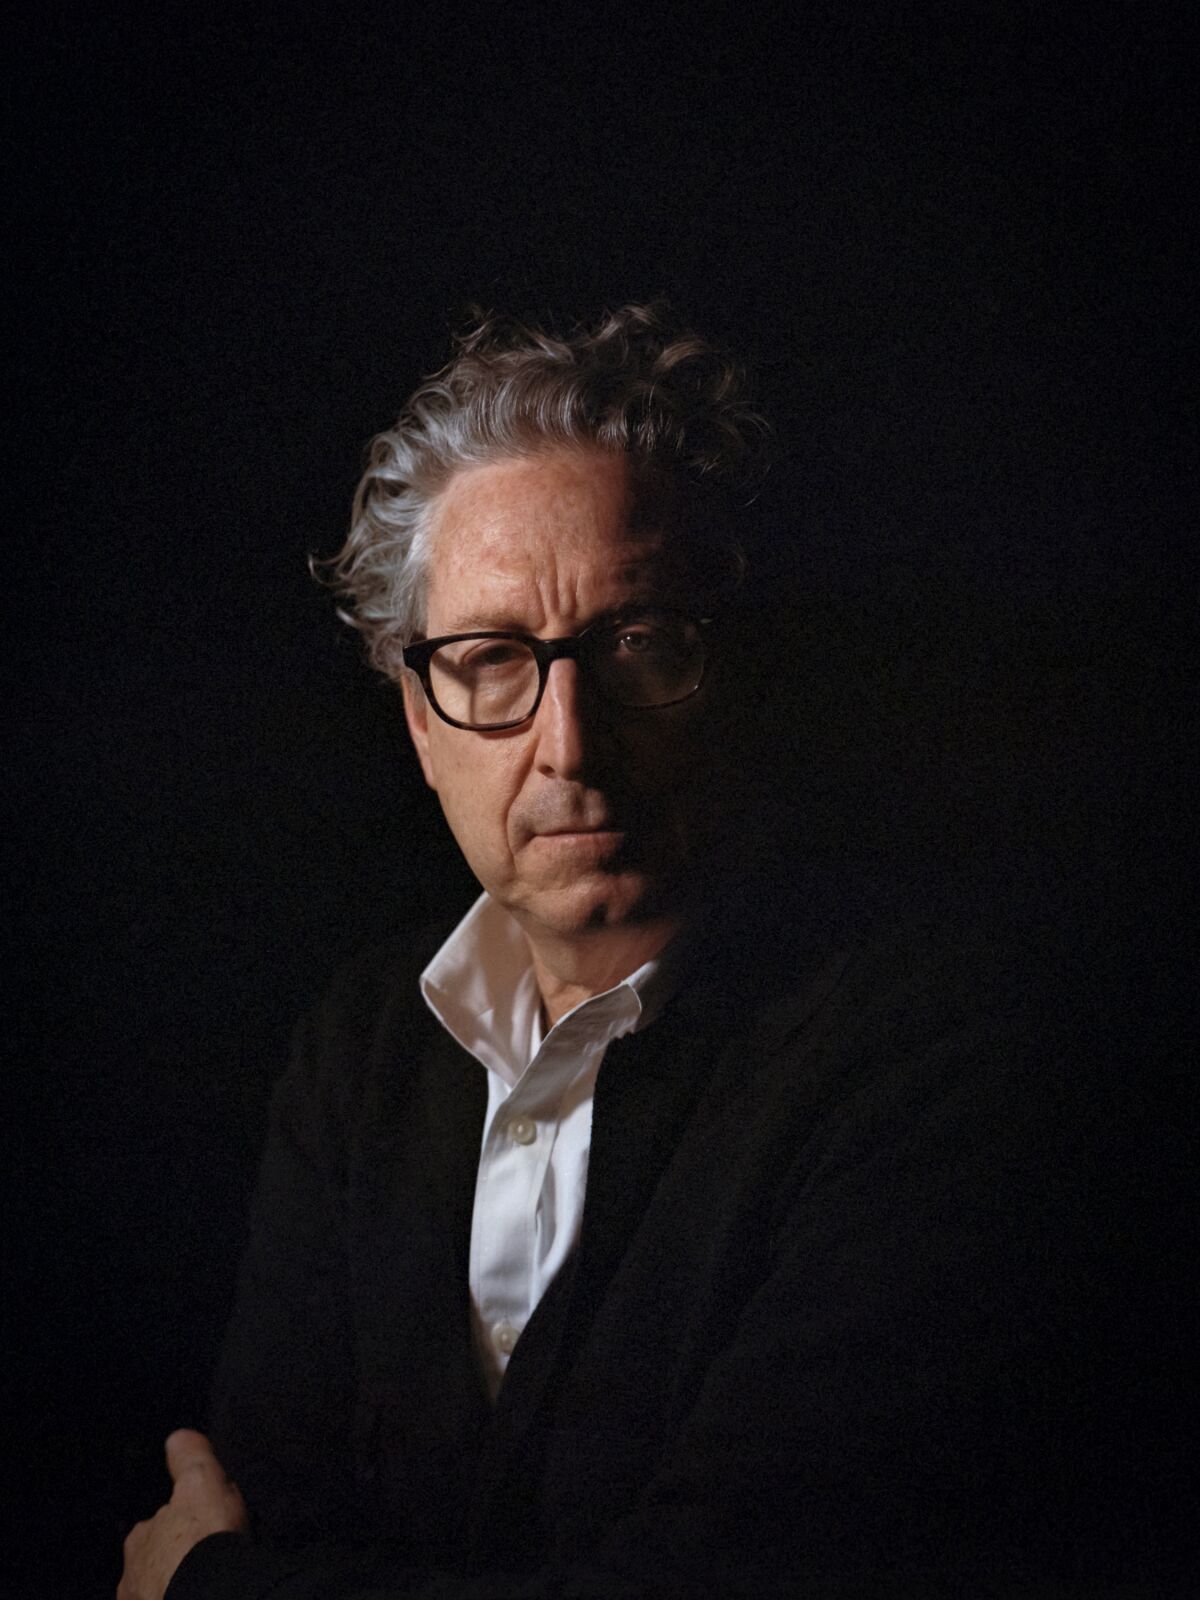 A portrait of a man with gray wavy hair and glasses in a white shirt and dark jacket.